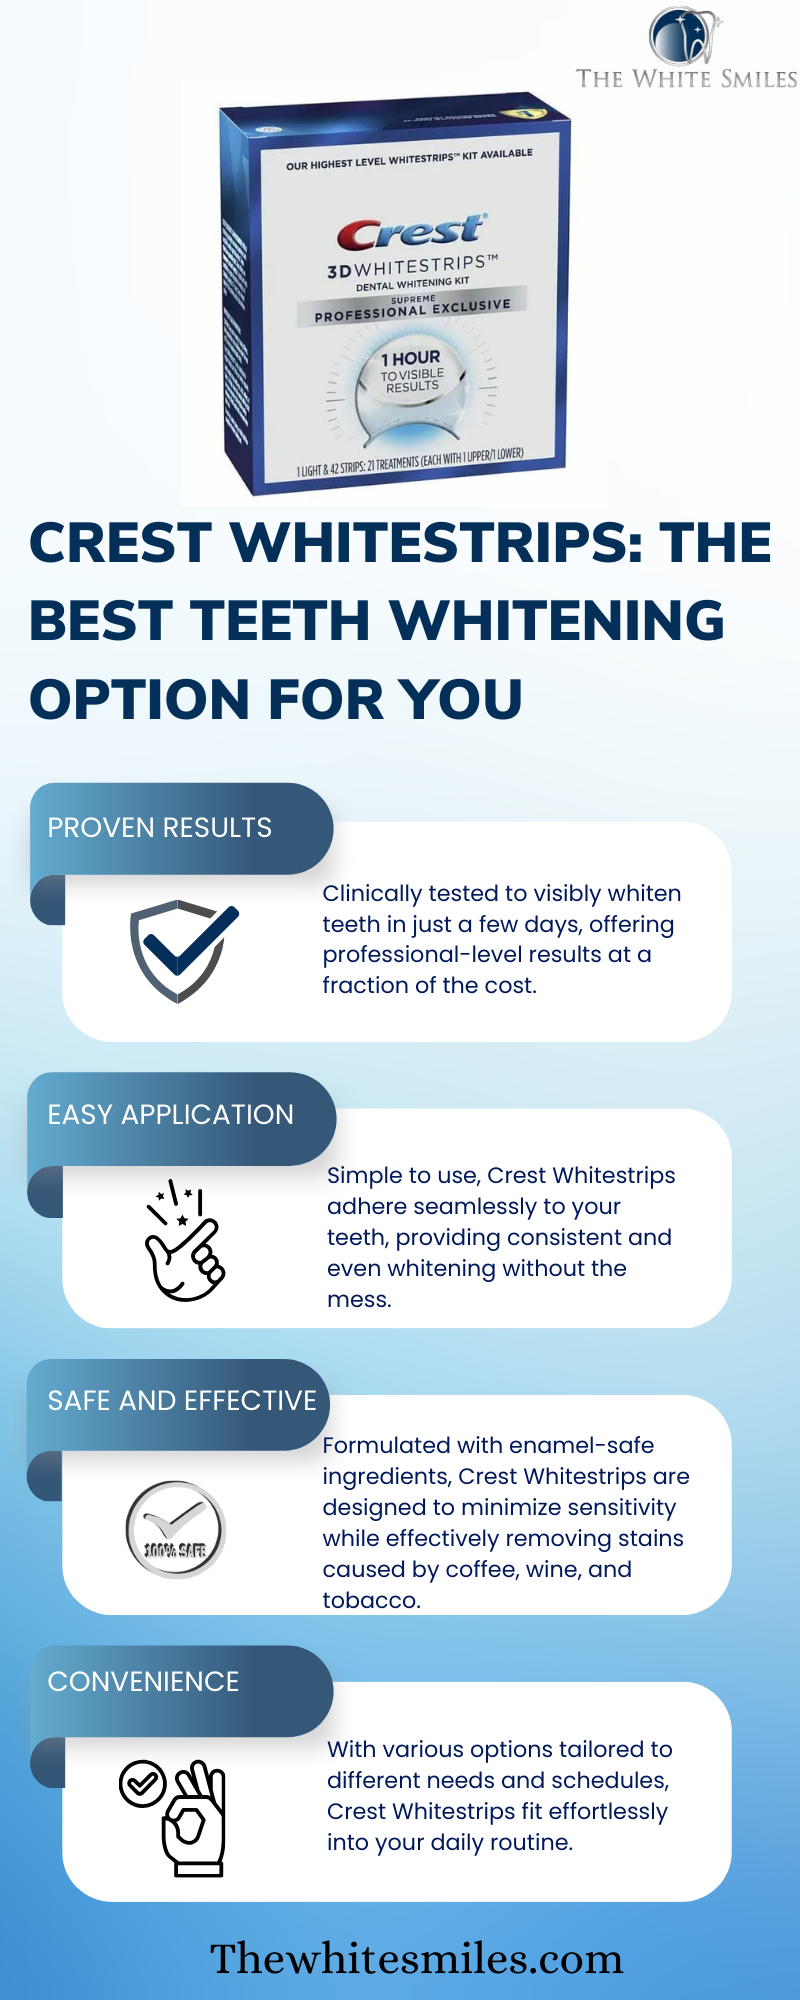 Crest Whitestrips: The Best Teeth Whitening Option for You